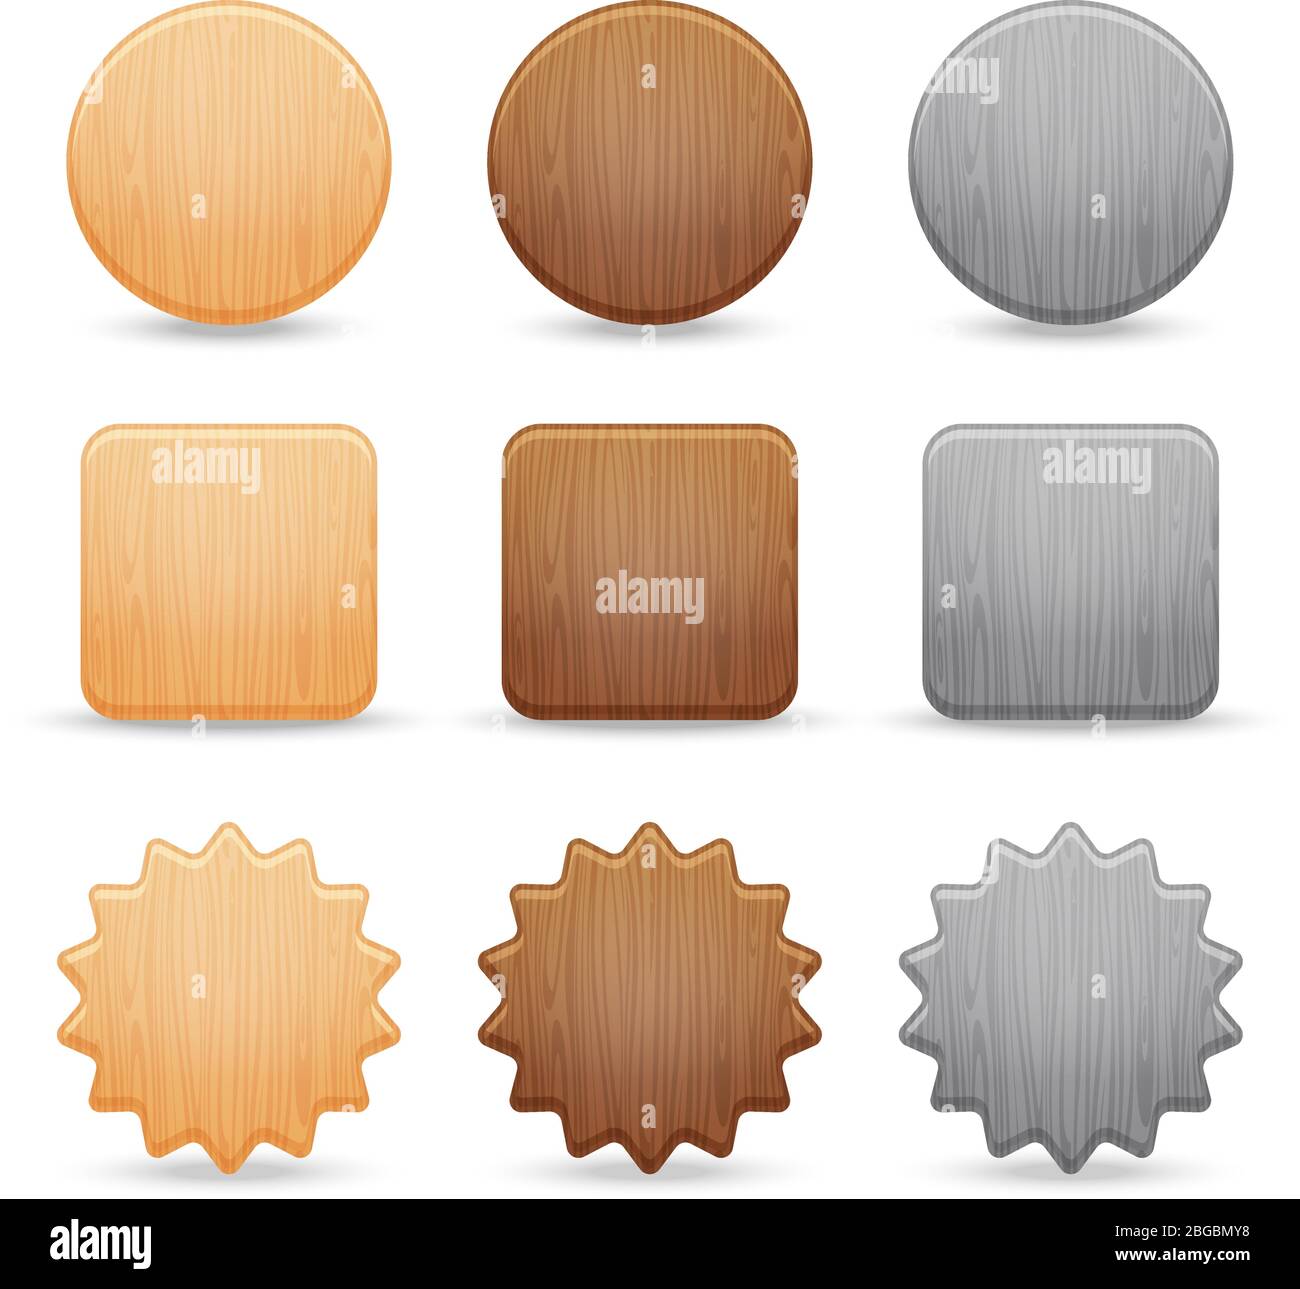 Set of wooden buttons Stock Vector